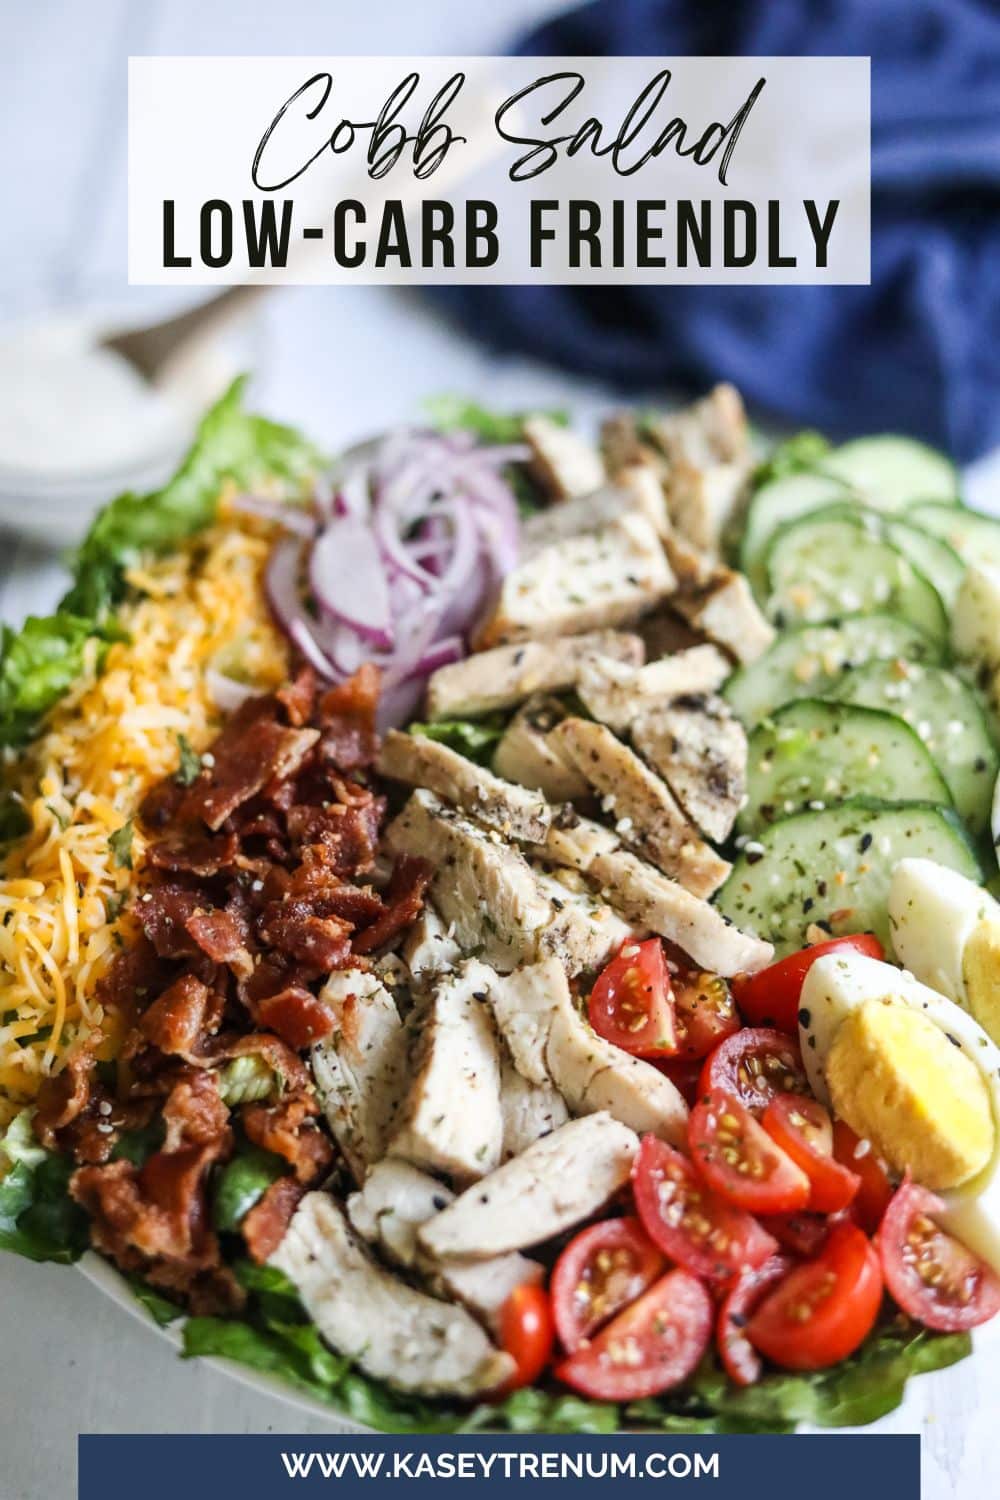 featured image for a healthy Cobb salad with chicken